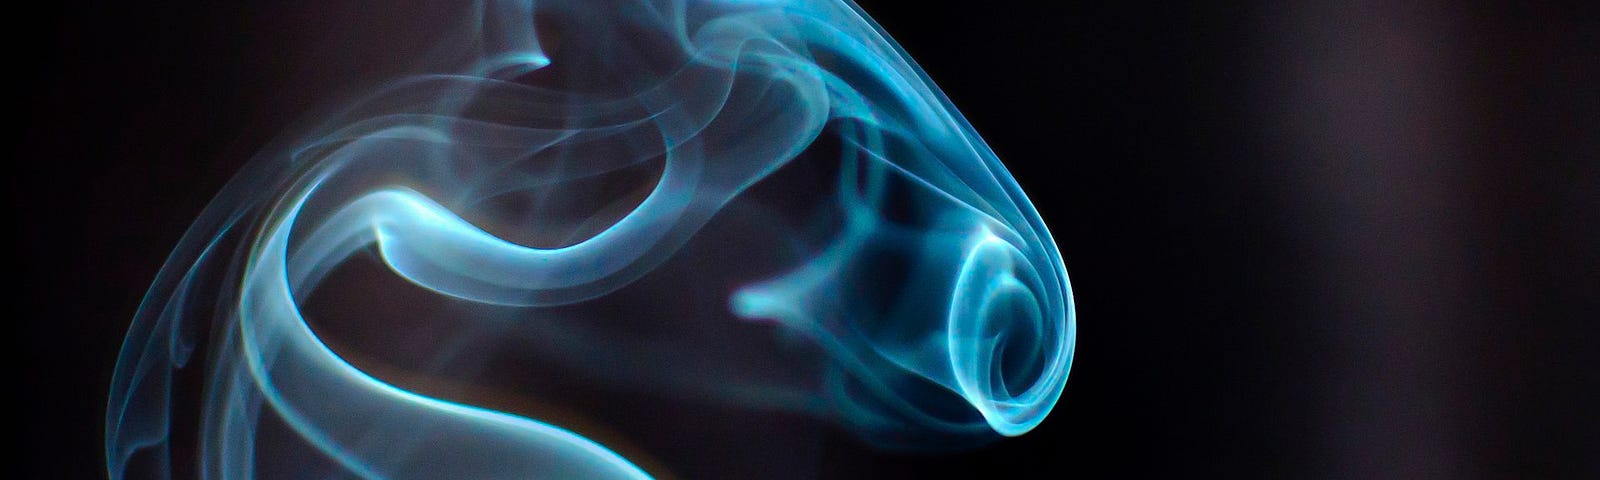 Photo of smoke rising from a stick of incense.